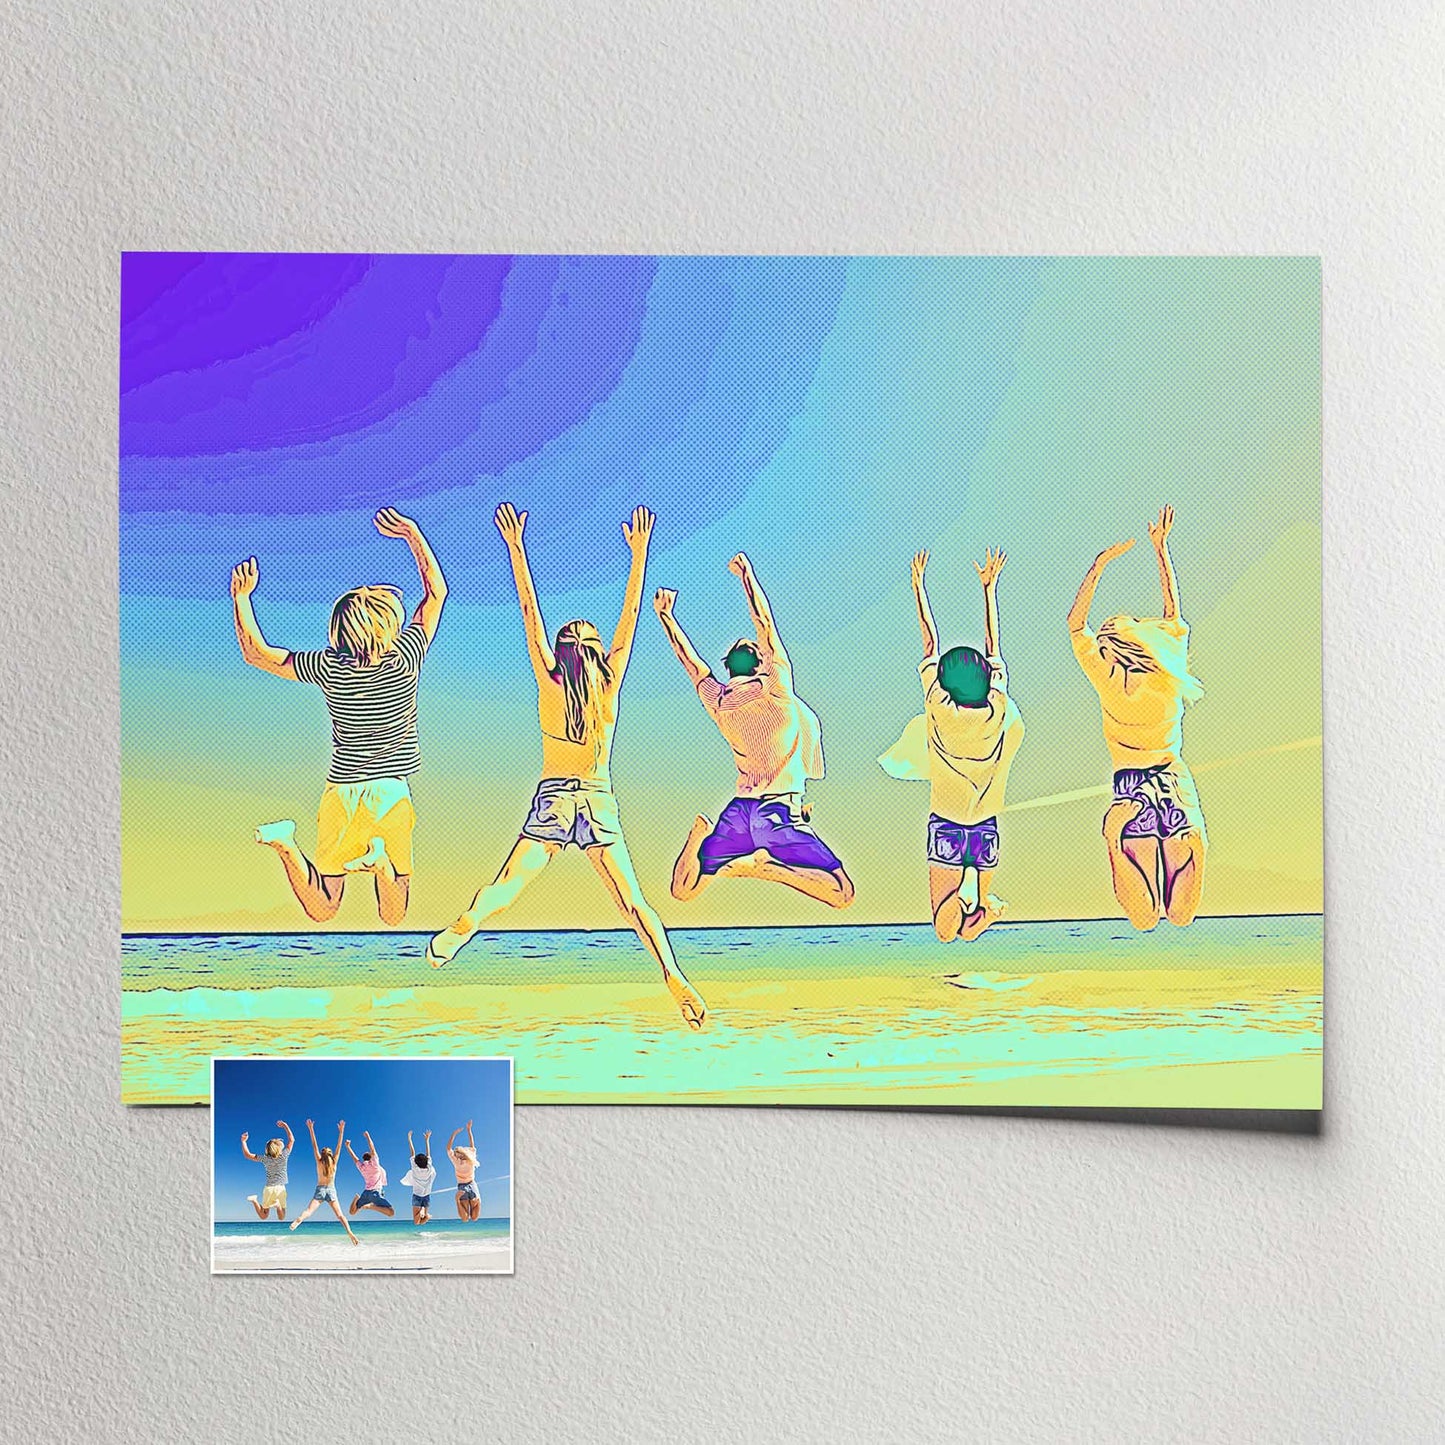 Make a statement with the Personalised Blue & Yellow Cartoon Print, transforming your favorite photo into a gallery-quality artwork. With its halftone effect and a captivating mix of yellow, blue, and purple hues